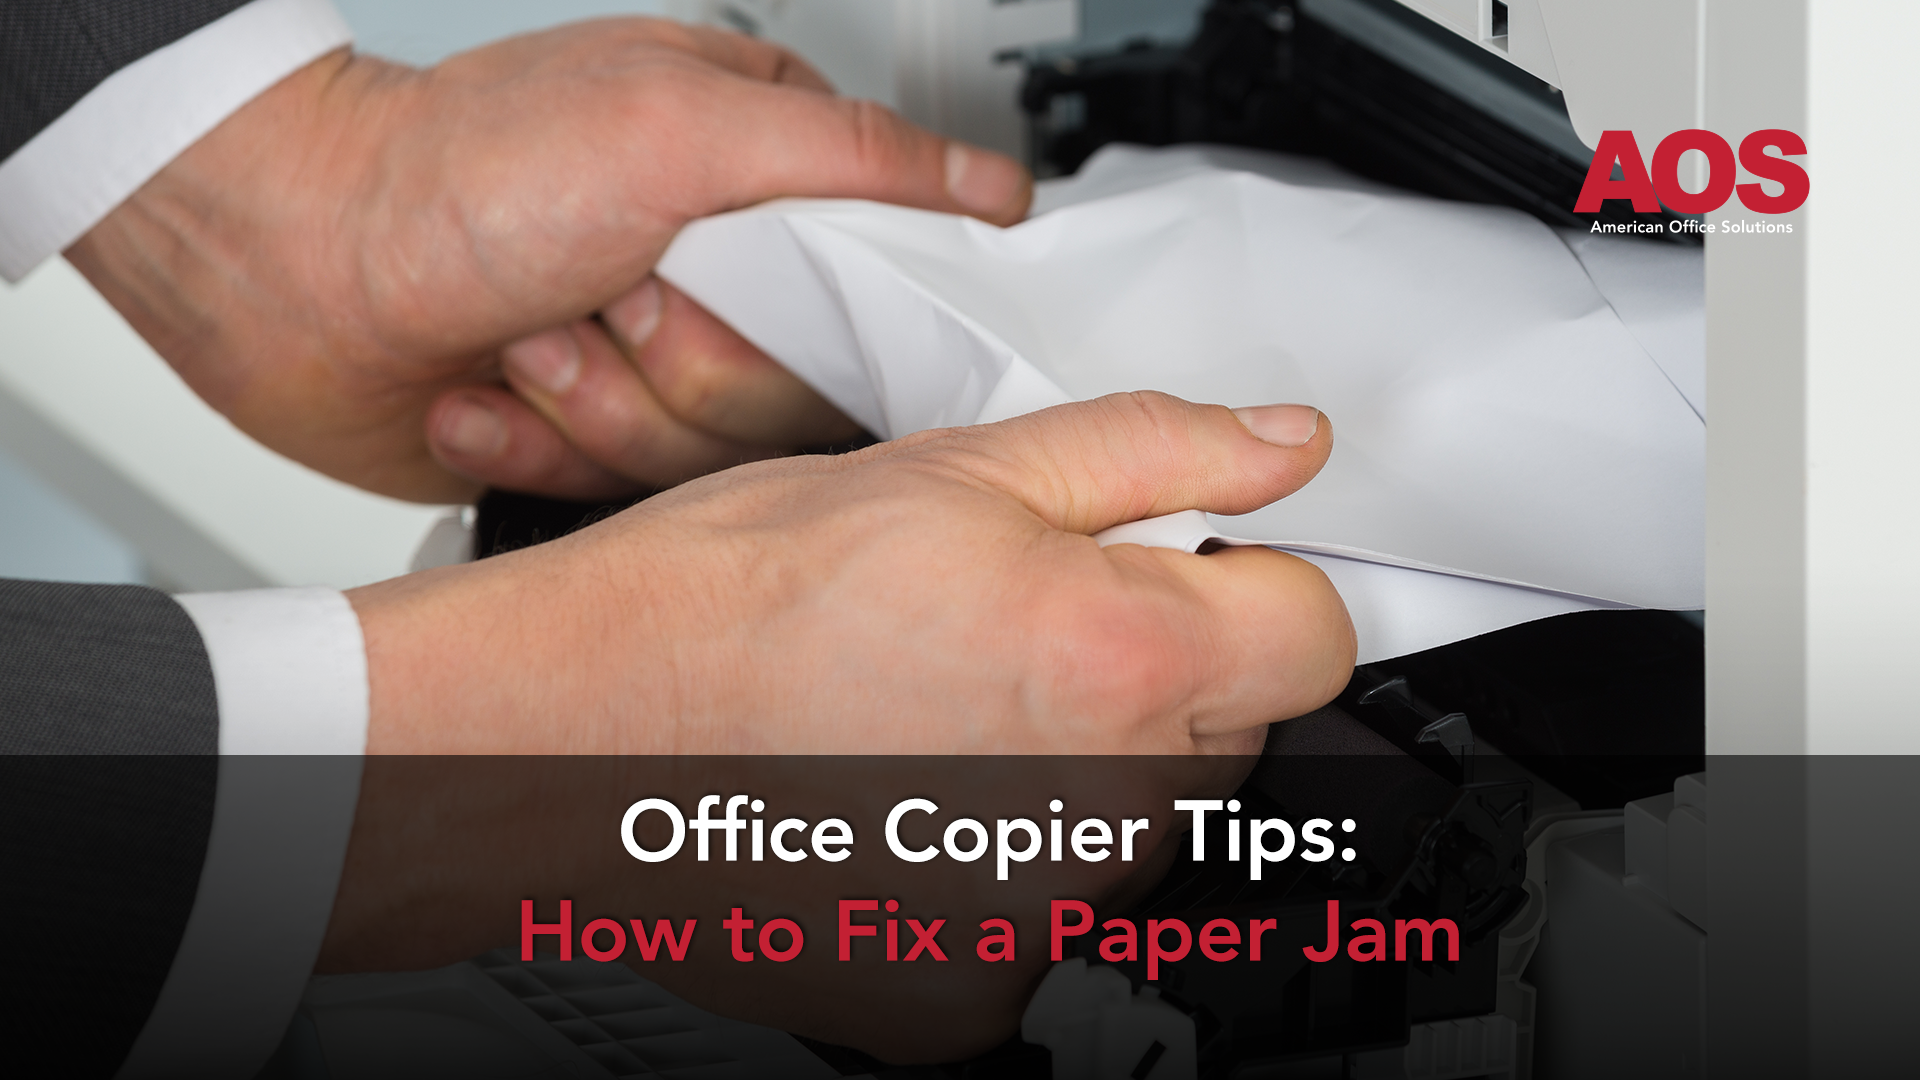  Office Copier Tips: How To Fix A Paper Jam